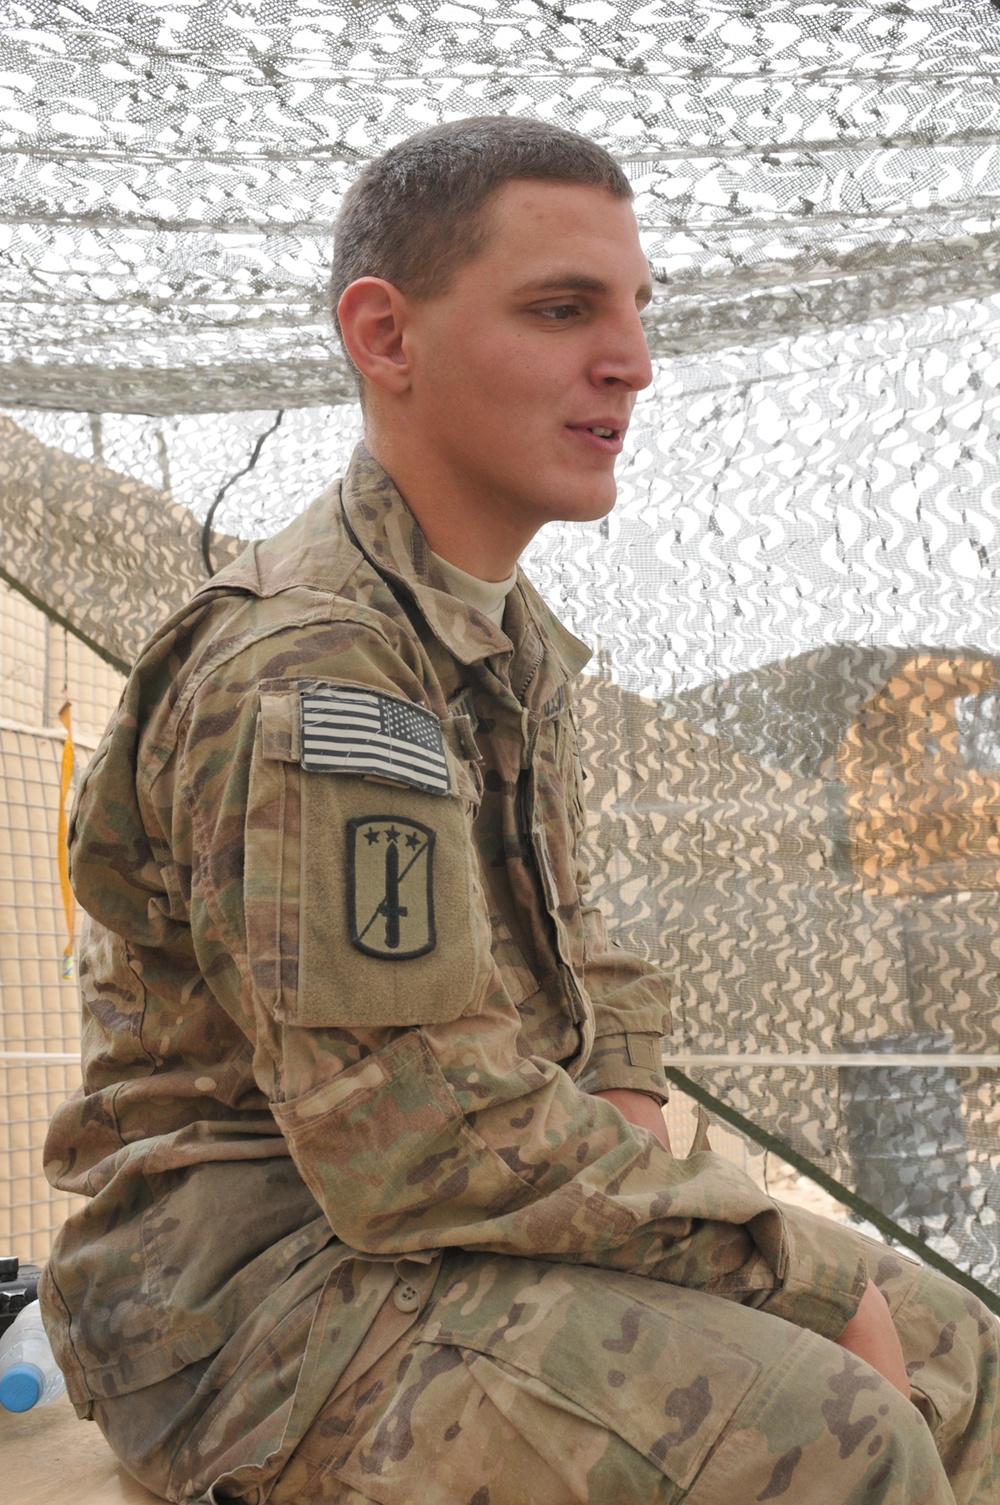 Engineer follows in father's footsteps by serving country